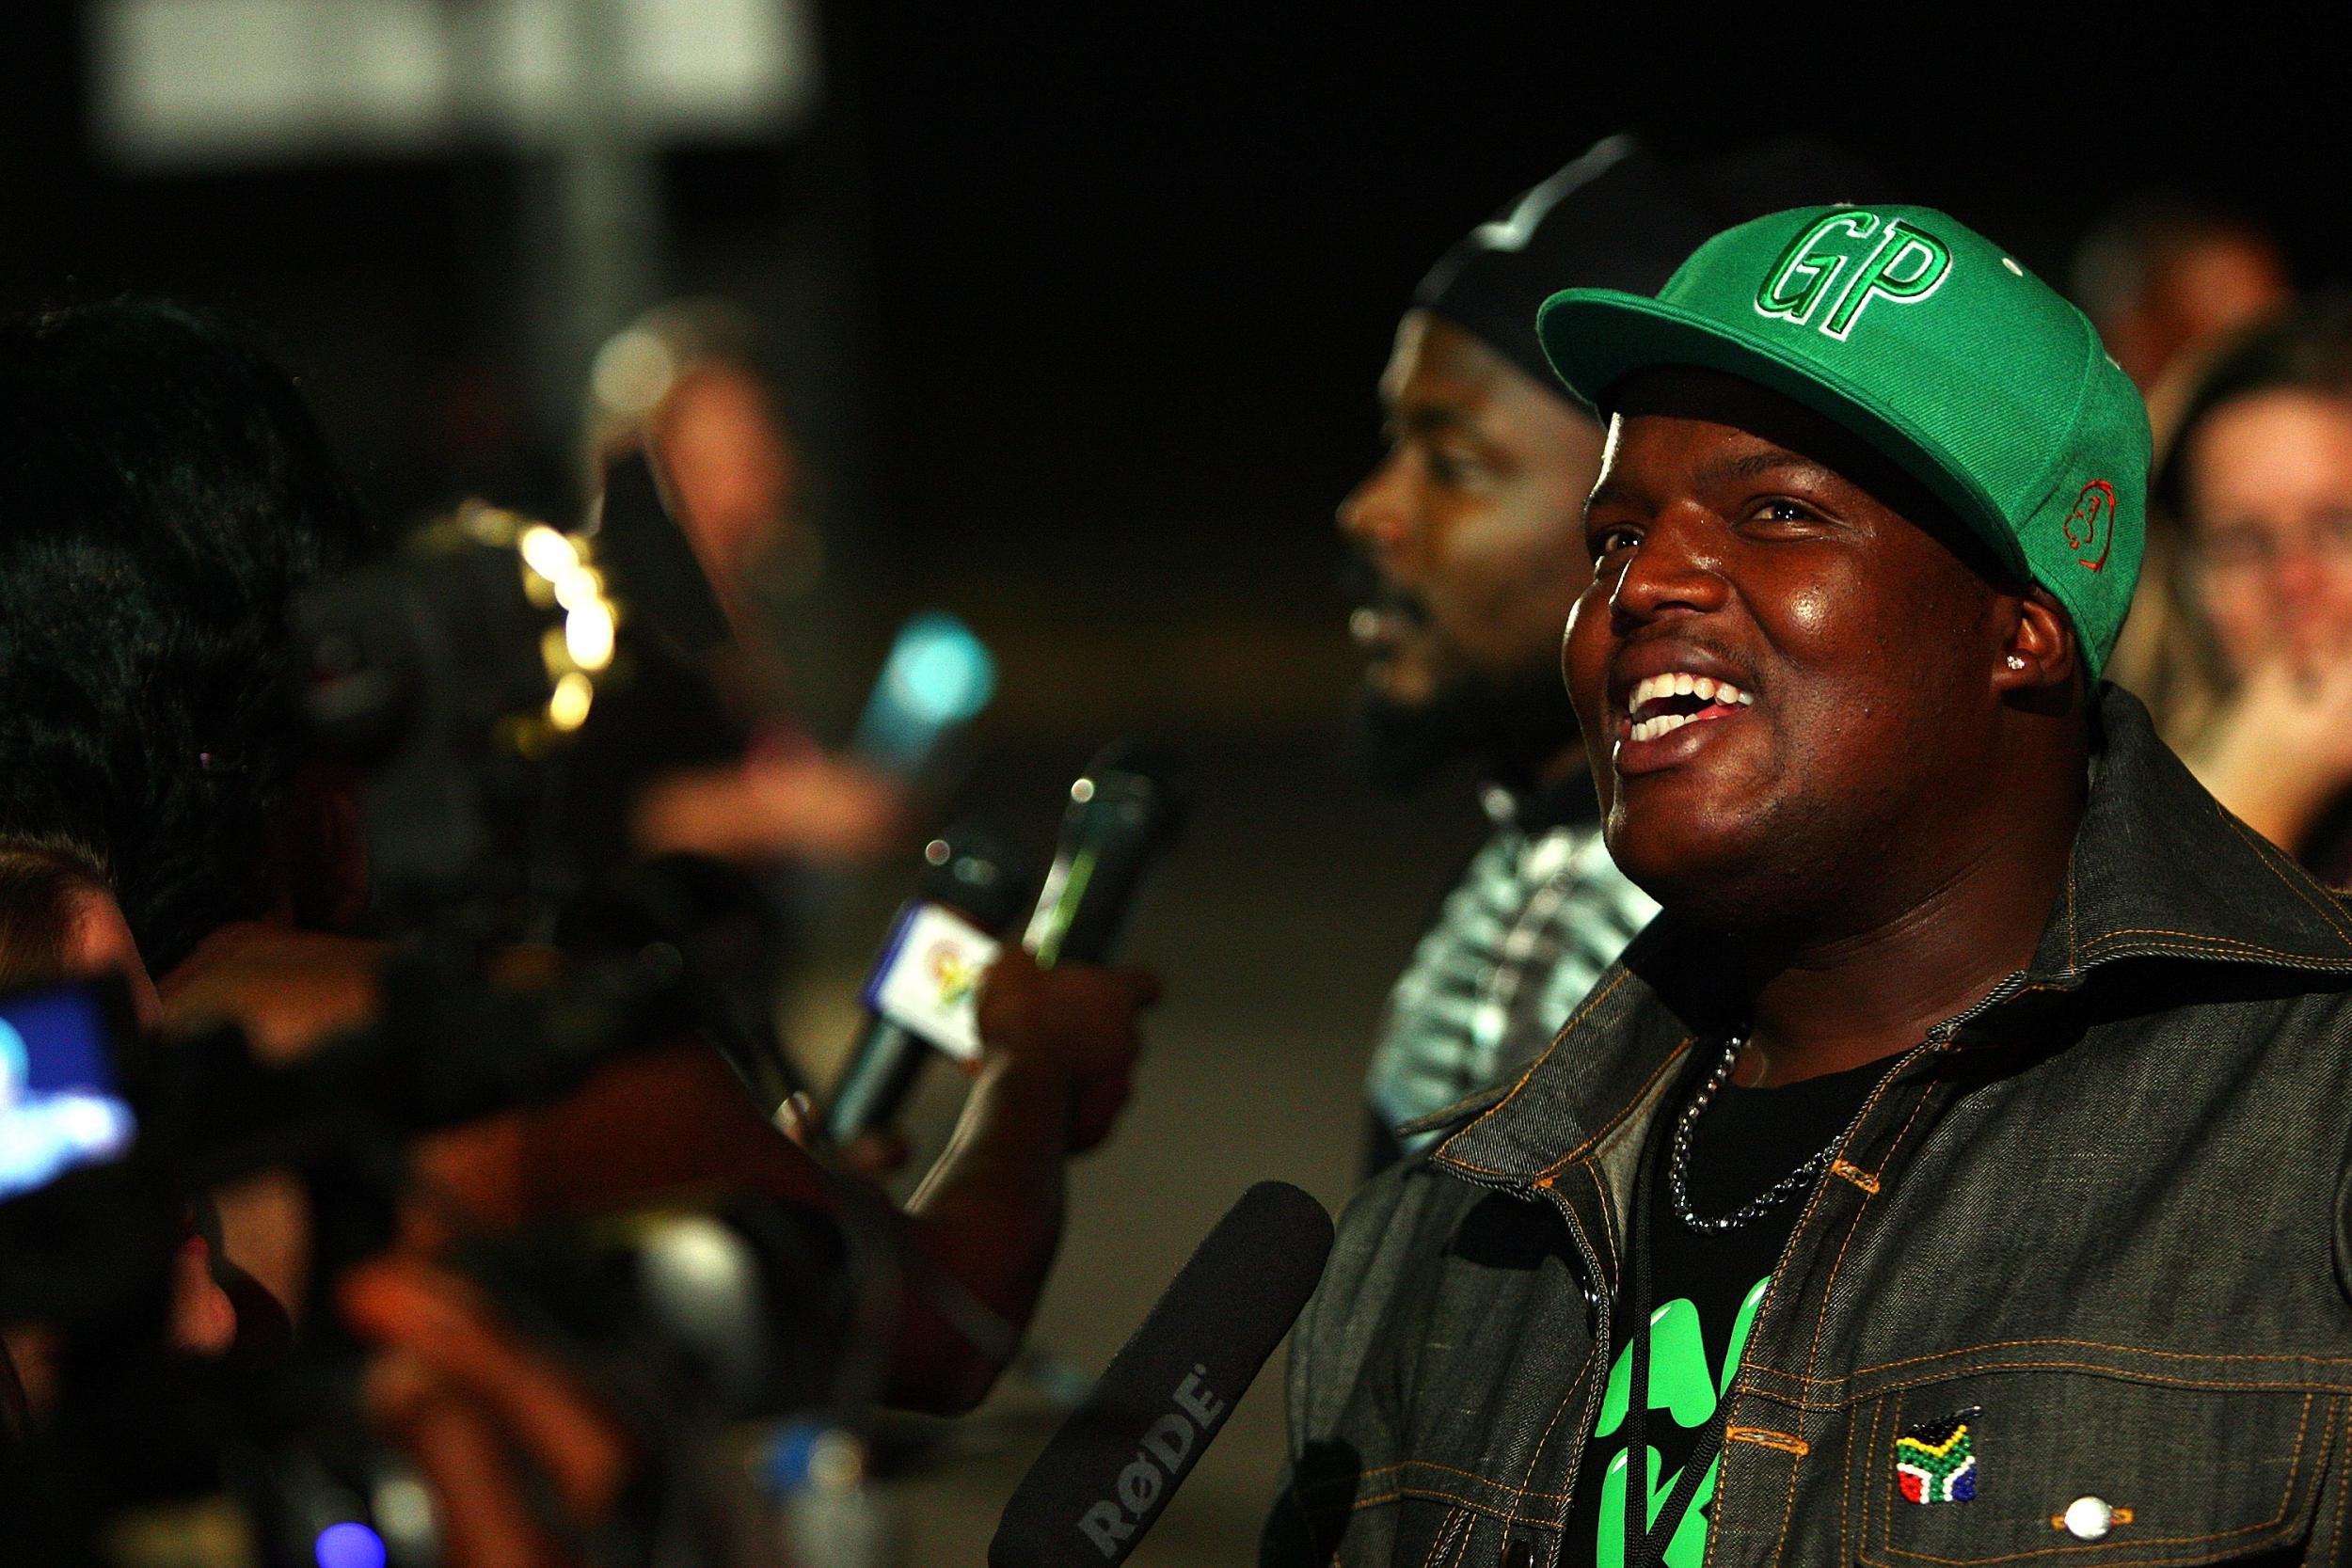 Hip Hop Pantsula, as he was also known, at the MTV Africa Music Awards in 2008